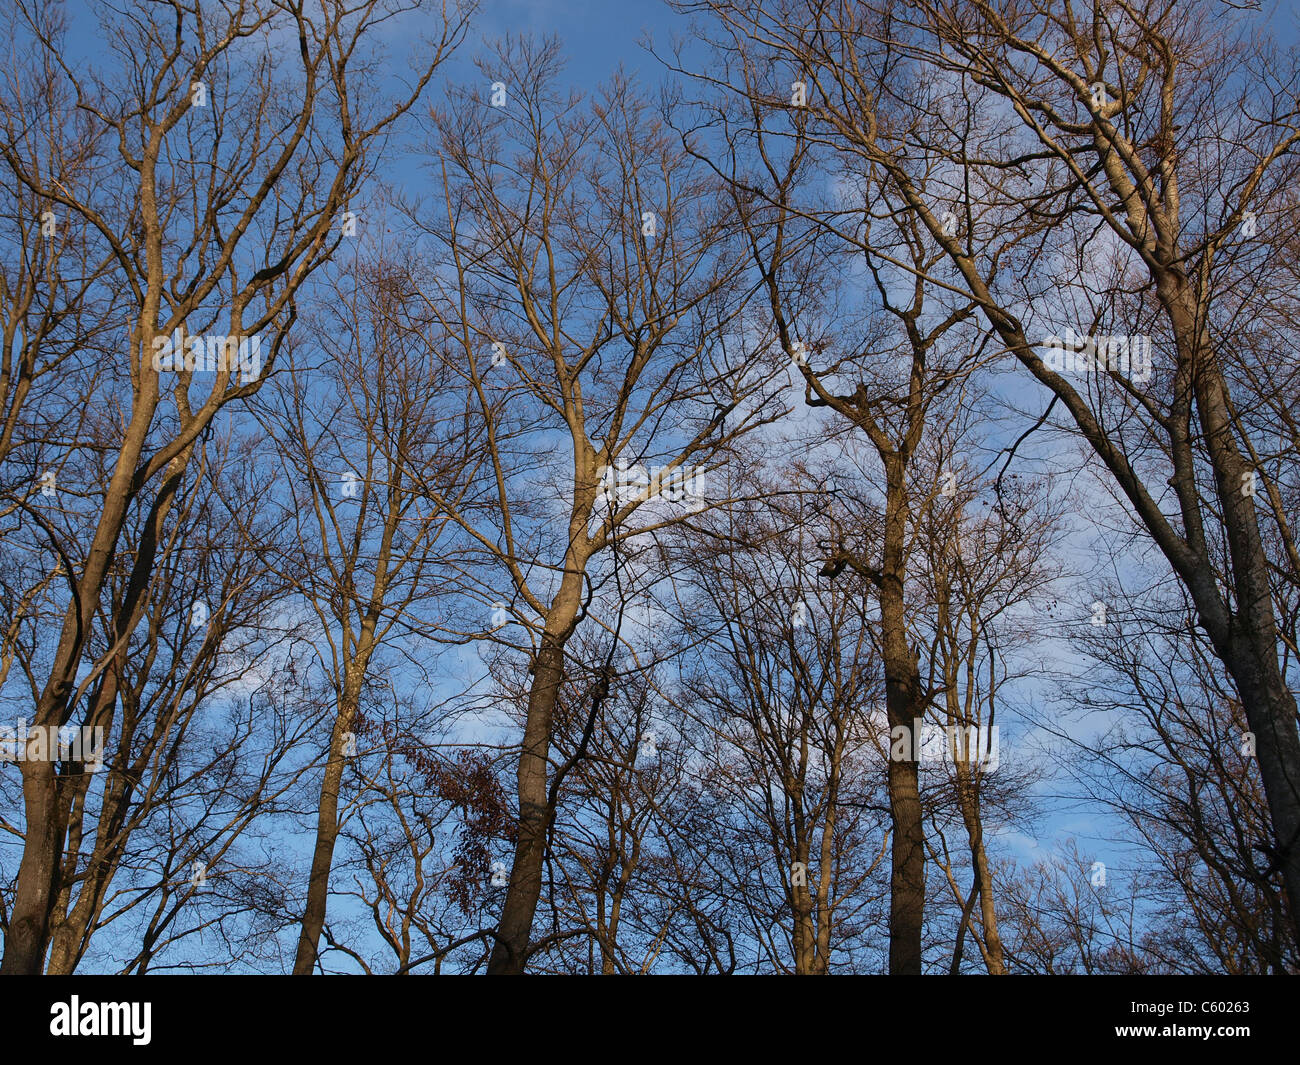 Bare trees against a blue sky in winter. Stock Photo